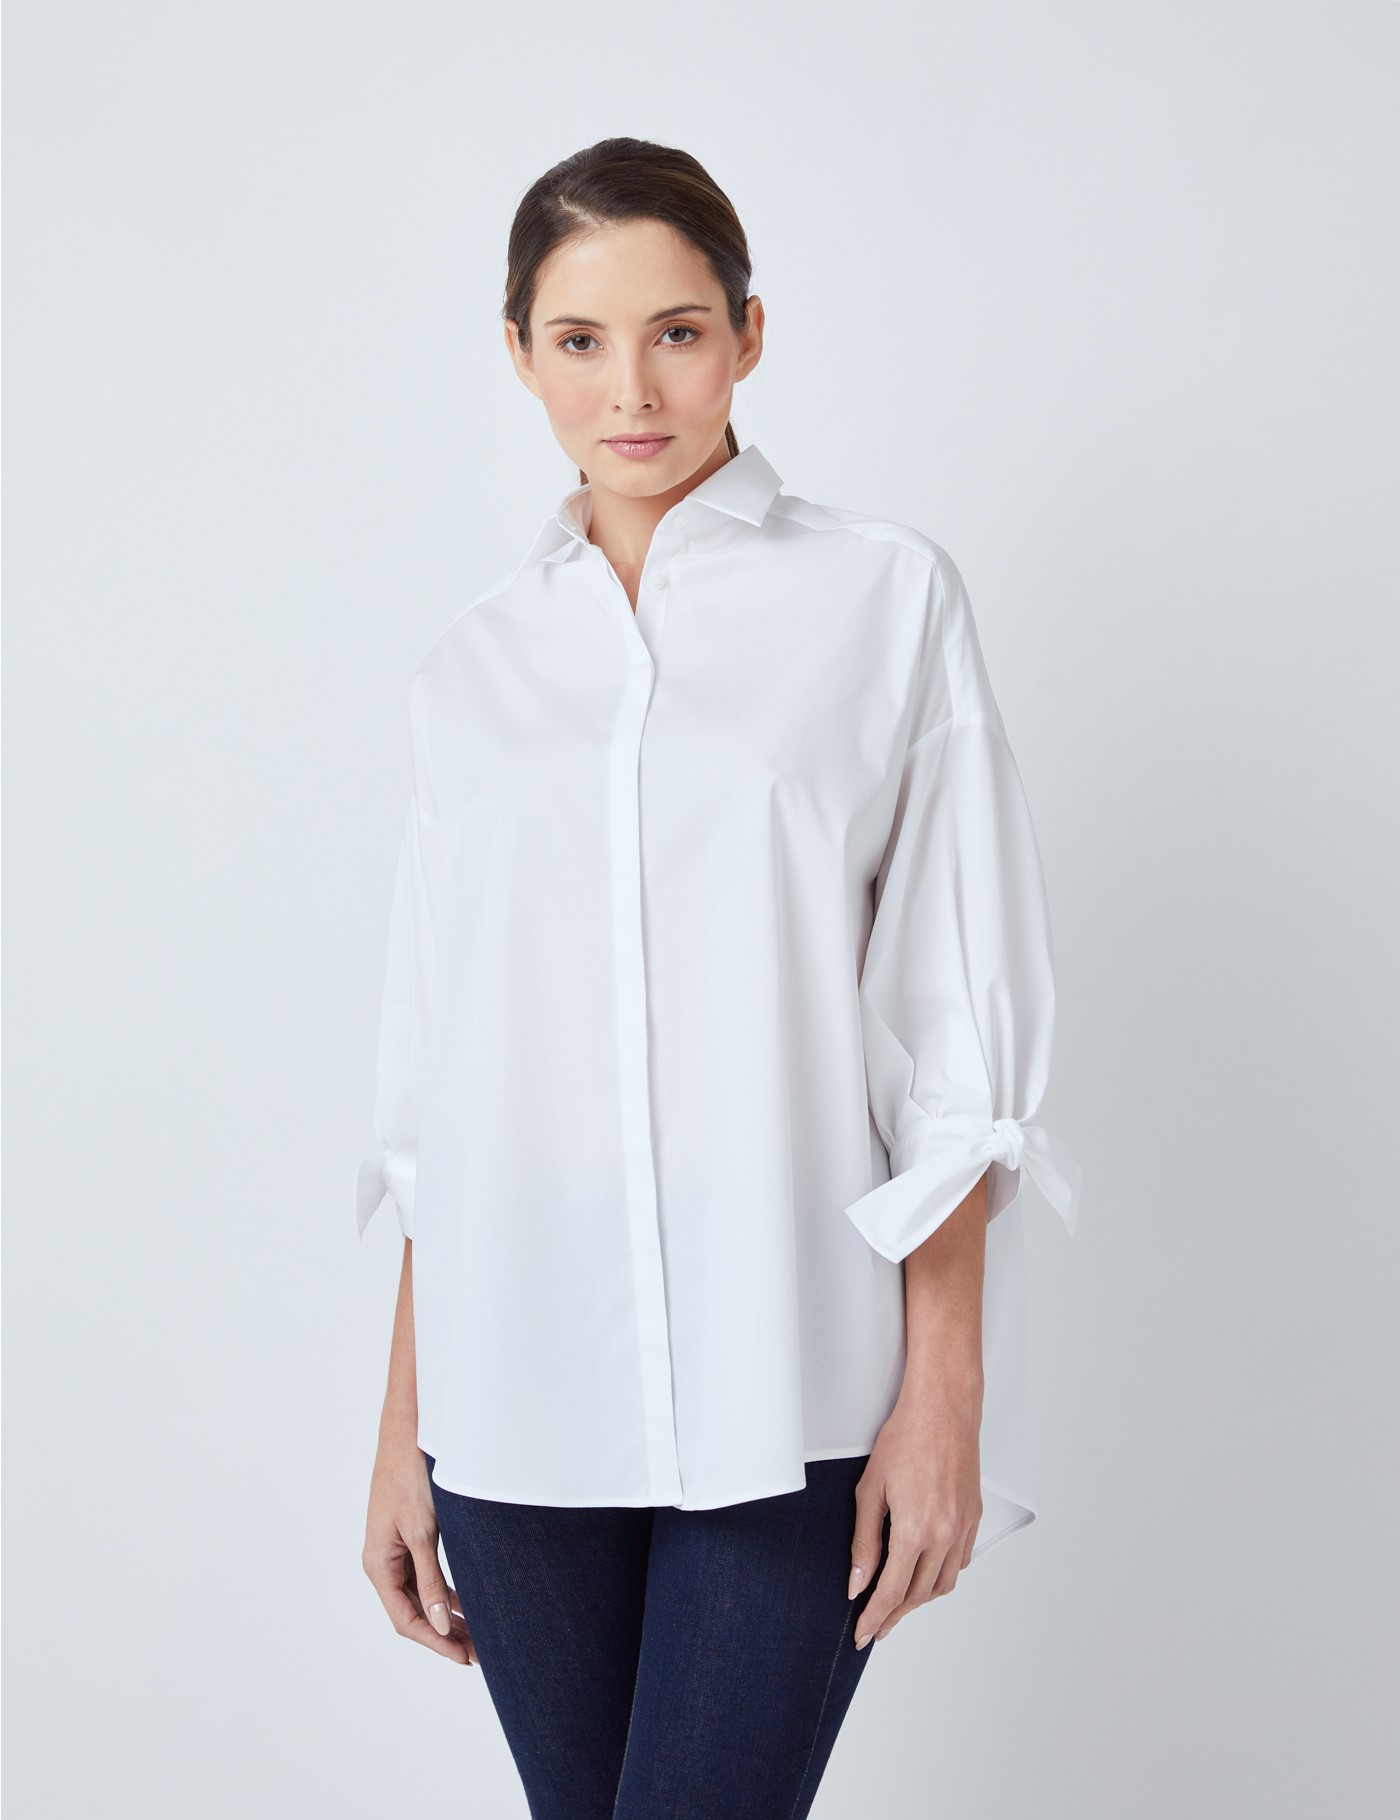 Cotton Stretch Women's Boutique Shirt with 3/4 Sleeve Ties in White ...